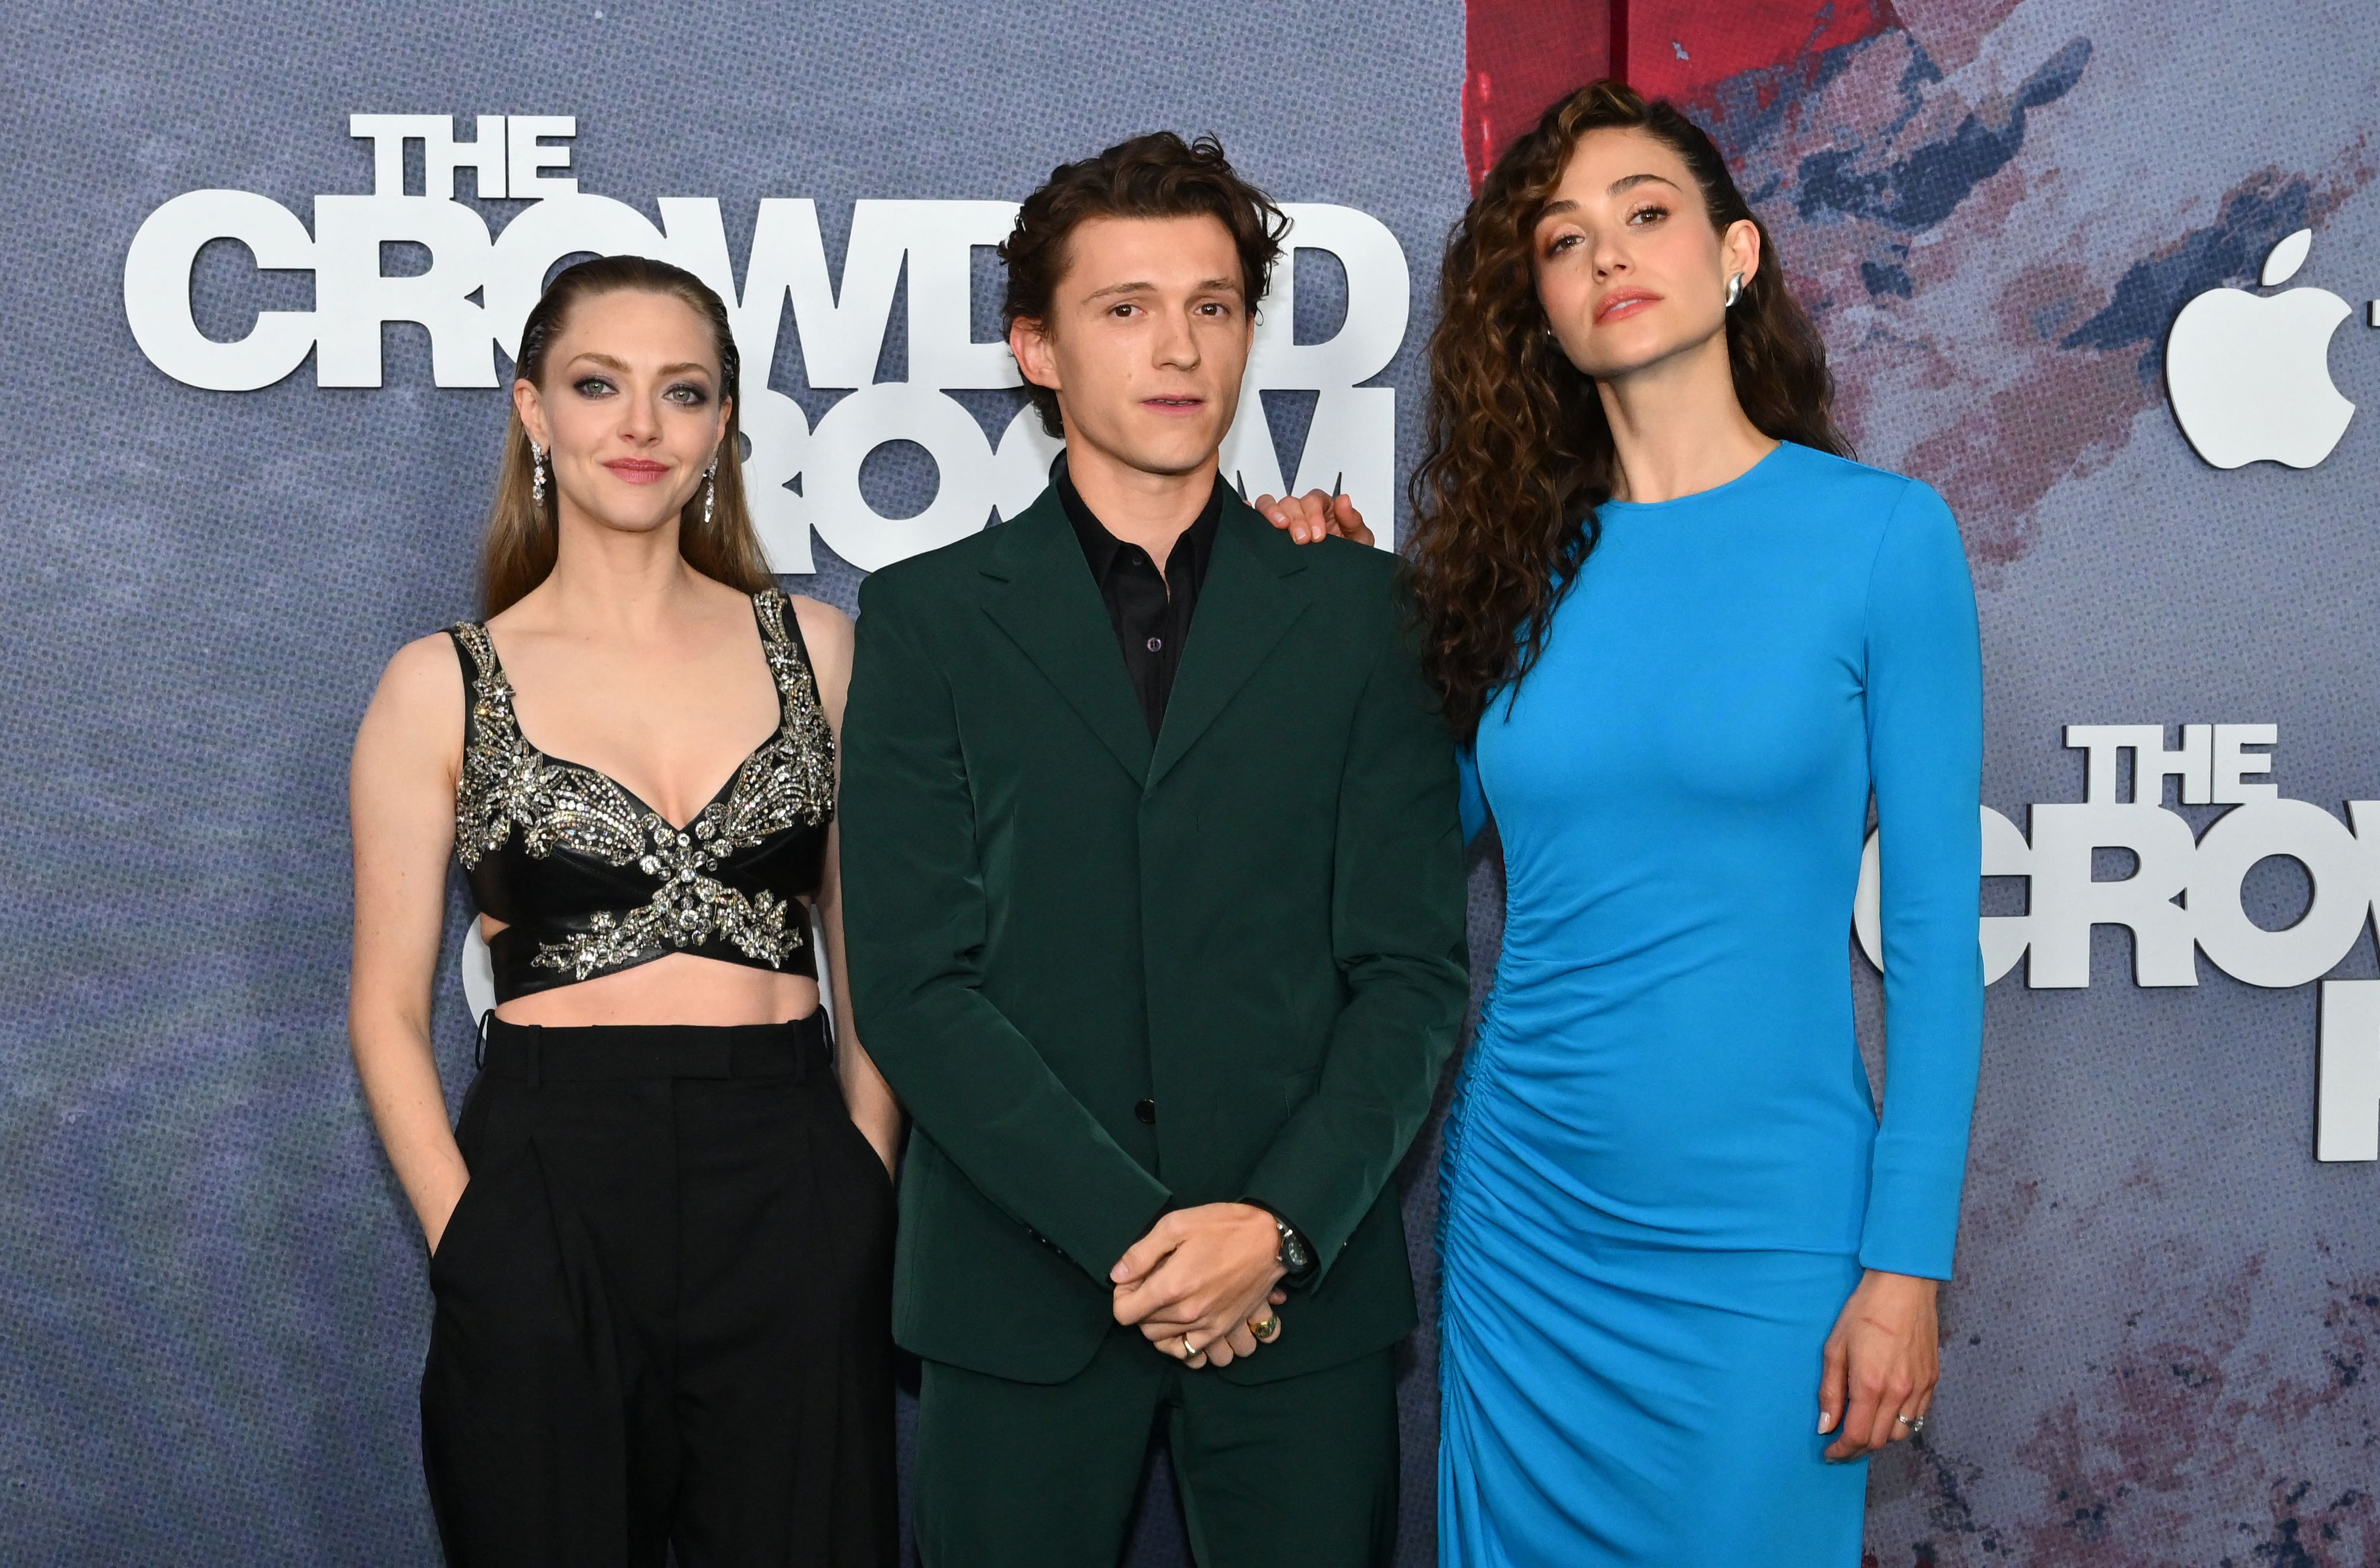 Amanda Seyfried, Tom Holland, and Emmy Rossum attend the premiere of Apple TV+'s "The Crowded Room" at the Museum of Modern Art on June 1, 2023, in New York City. | Source: Getty Images